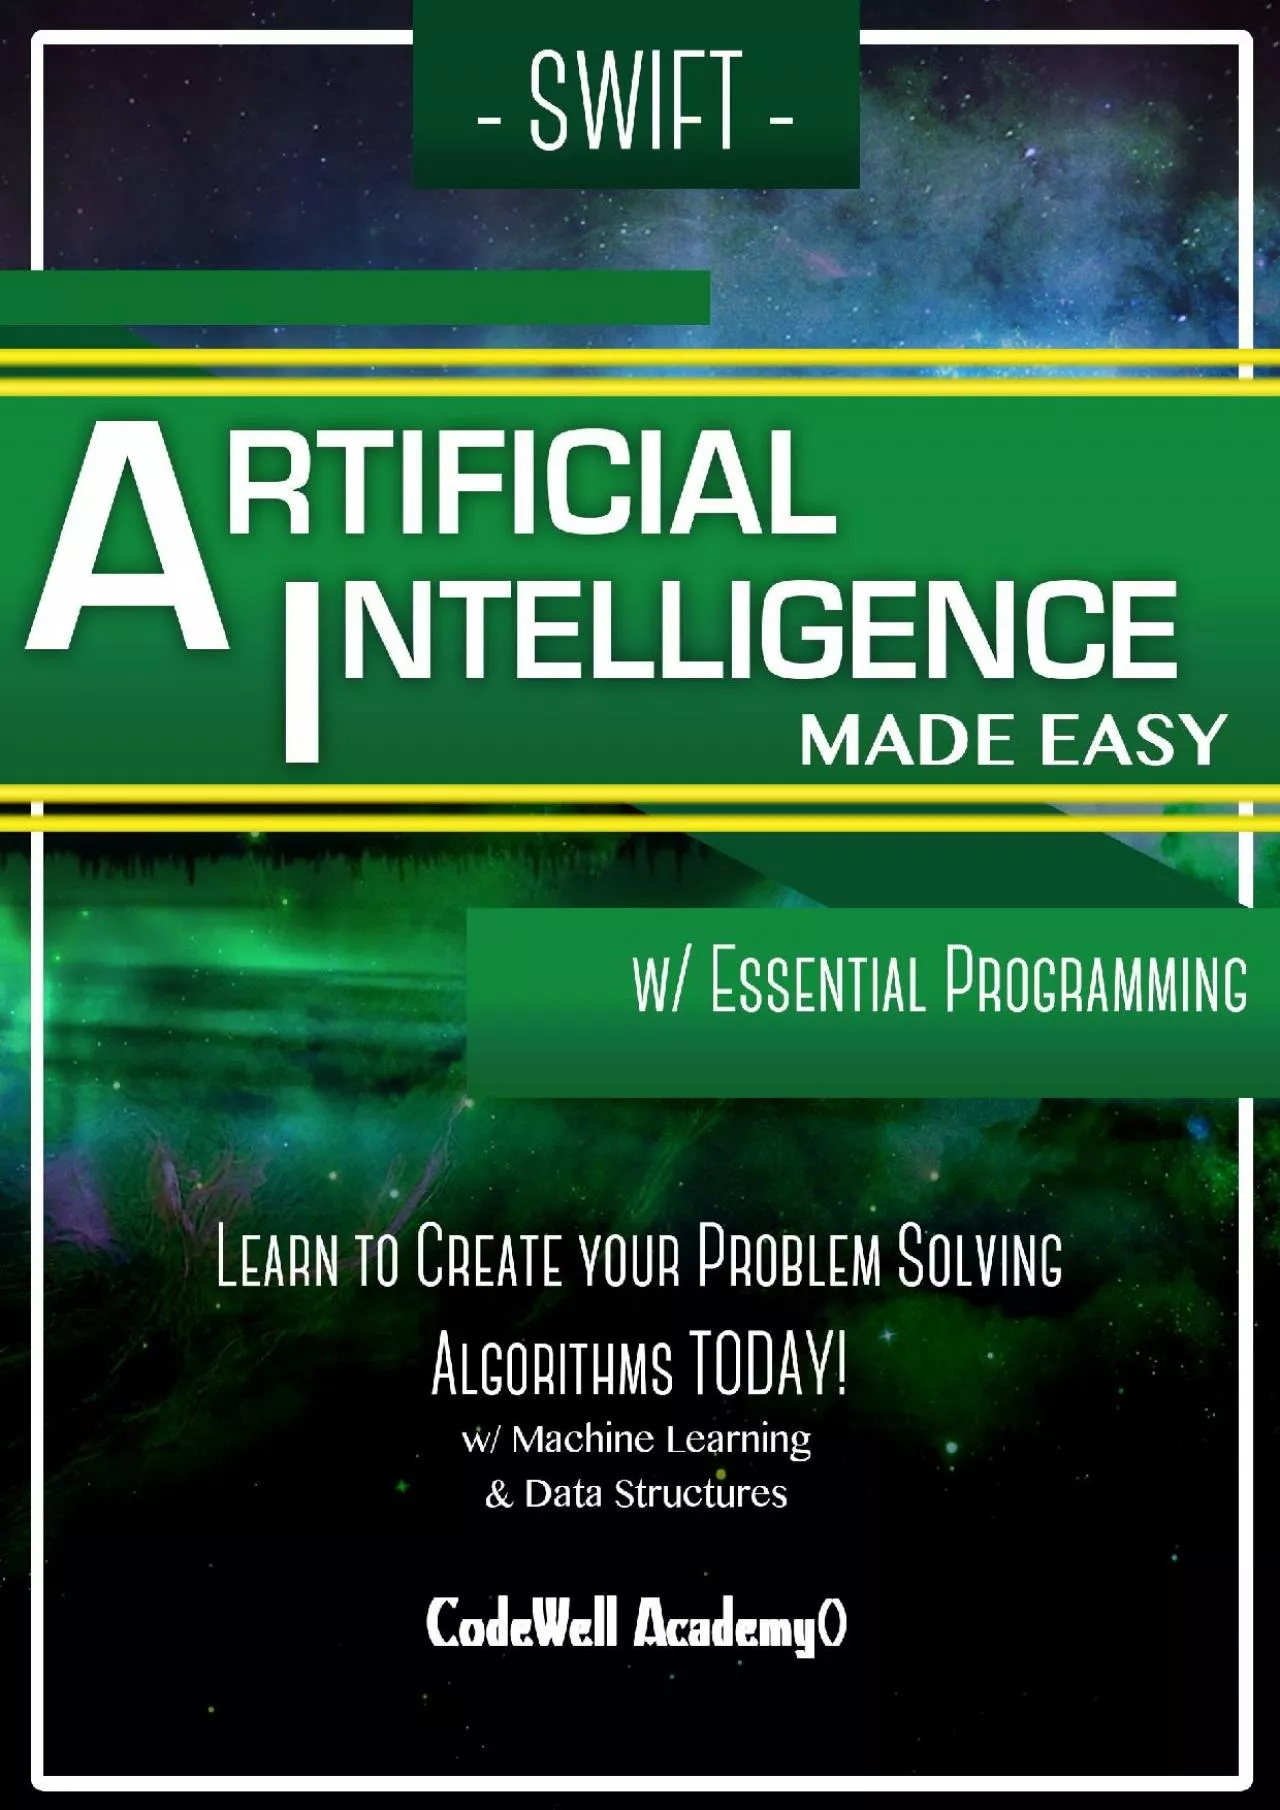 [BEST]-Swift Artificial Intelligence: Made Easy, w/ Essential Programming Learn to Create